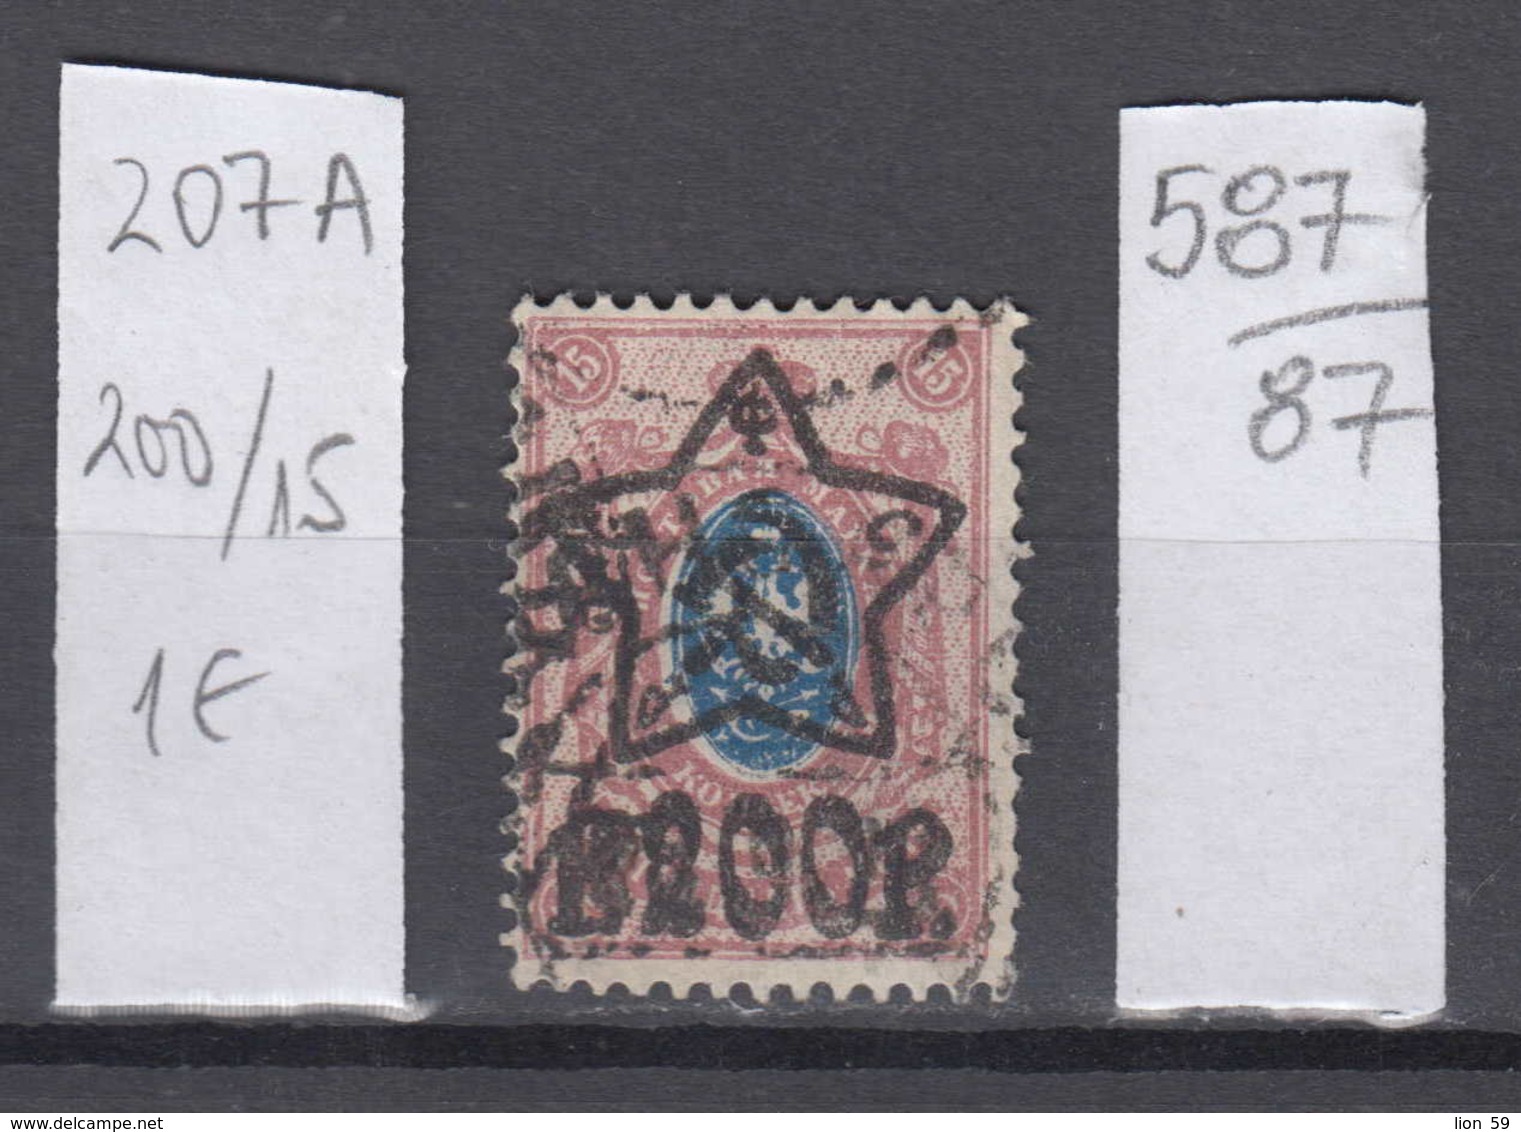 87K587 / 1922 - Michel Nr. 207 A - Overprint 200 R. / 15 K. - Freimarken , Used ( O ) Russia Russie - Used Stamps